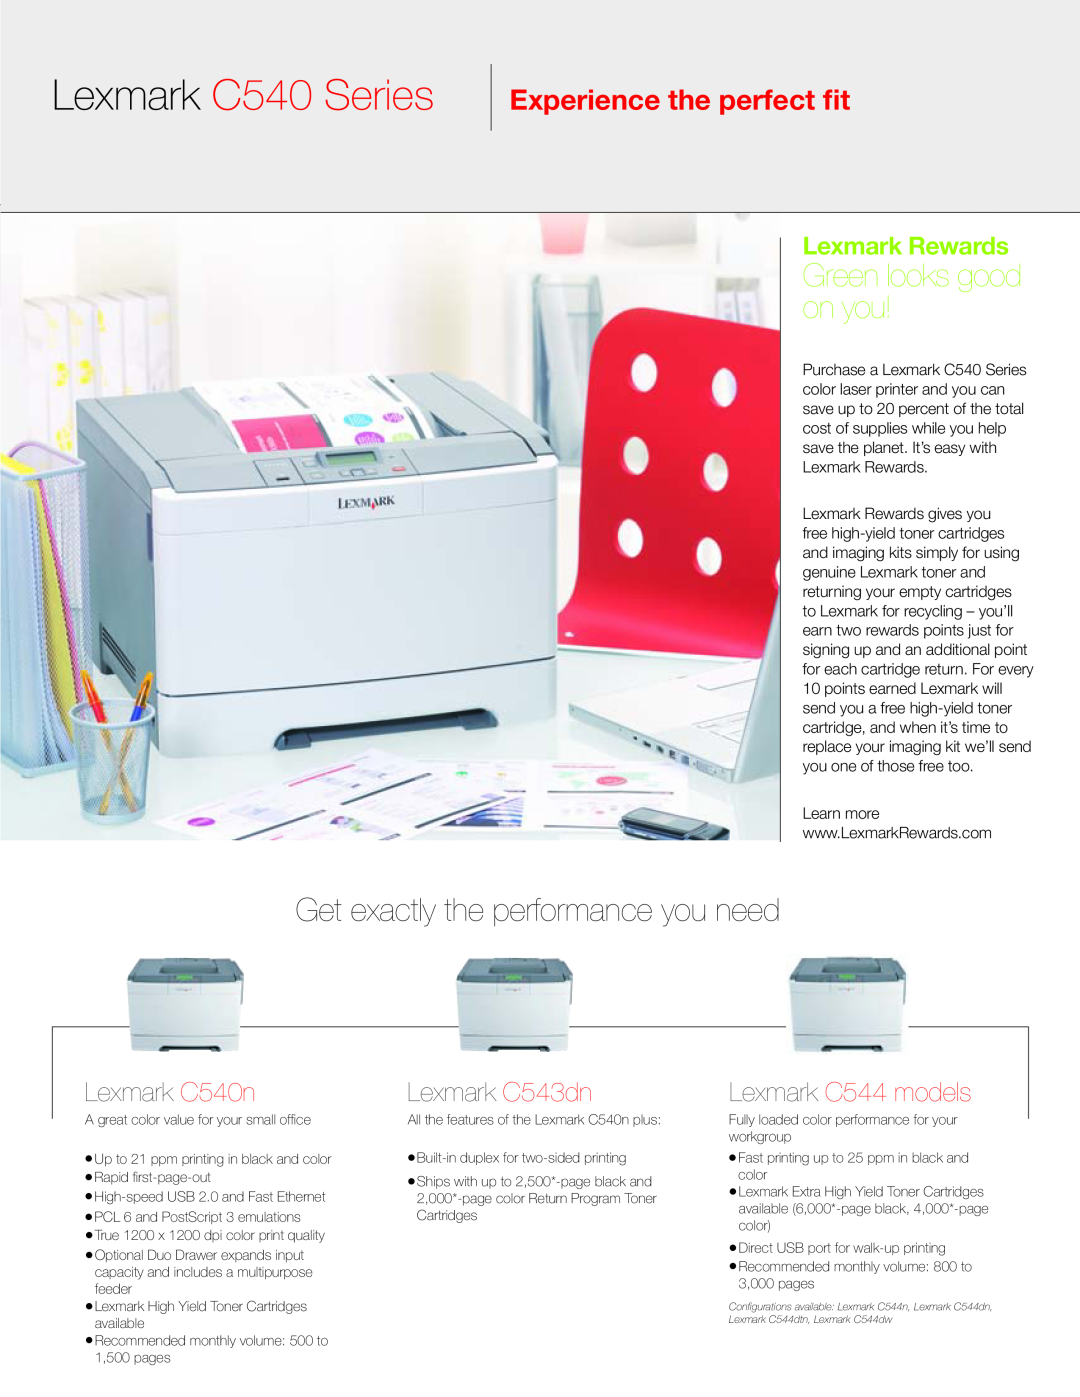 Lexmark C544 manual Get exactly the performance you need, Lexmark C540 Series, Green looks good on you, Lexmark C540n 